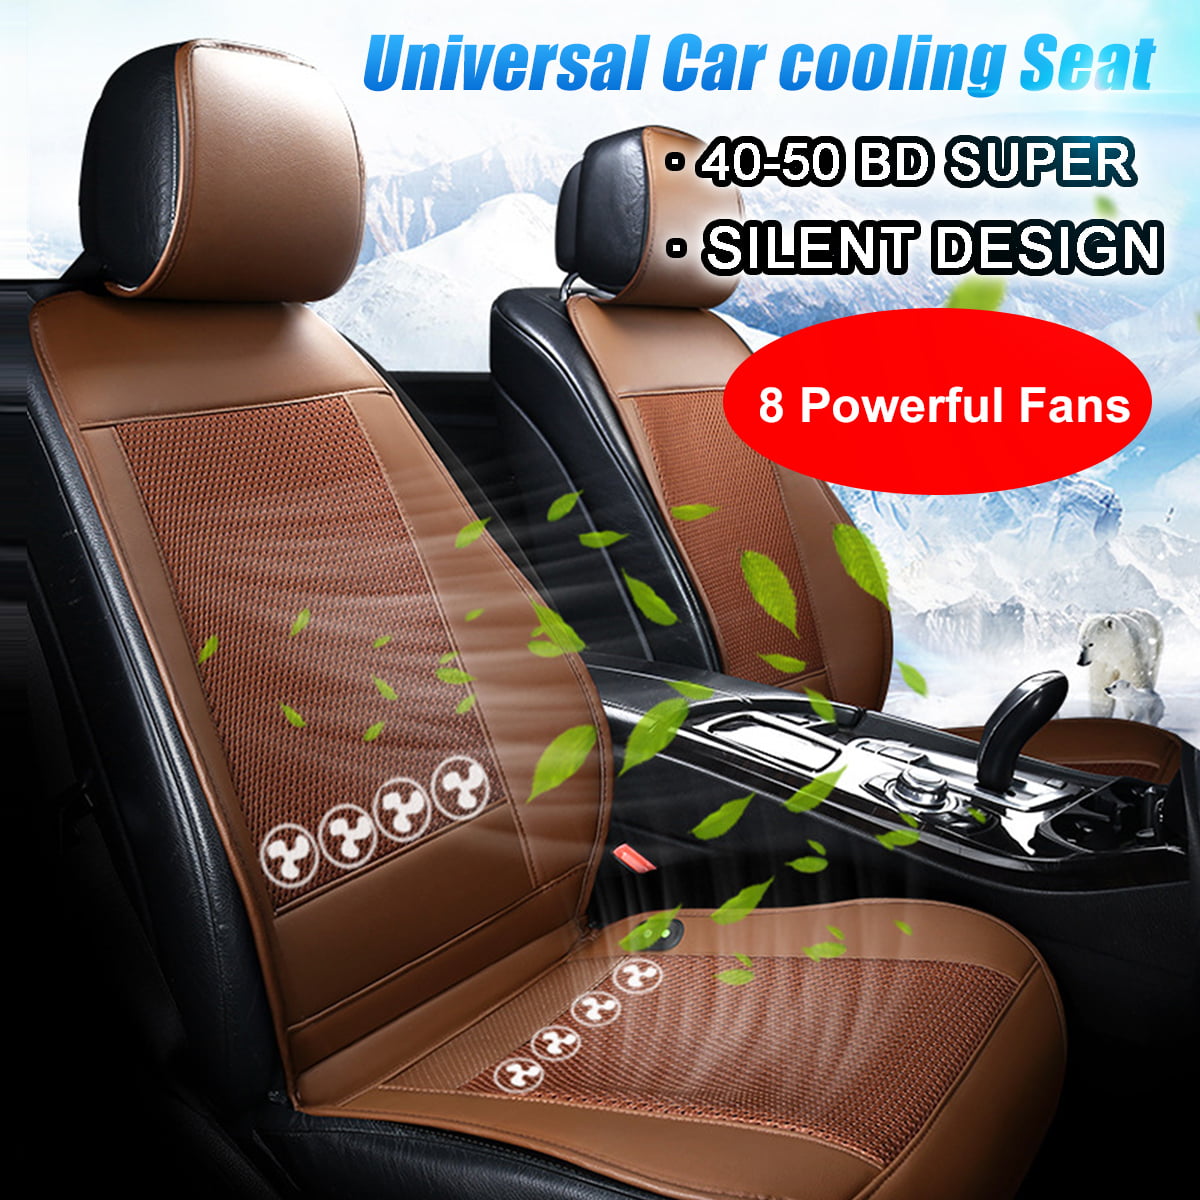 Cooling Car Seat Cushion Padded Fan Cushion Cools Back & Bottom Quickly 